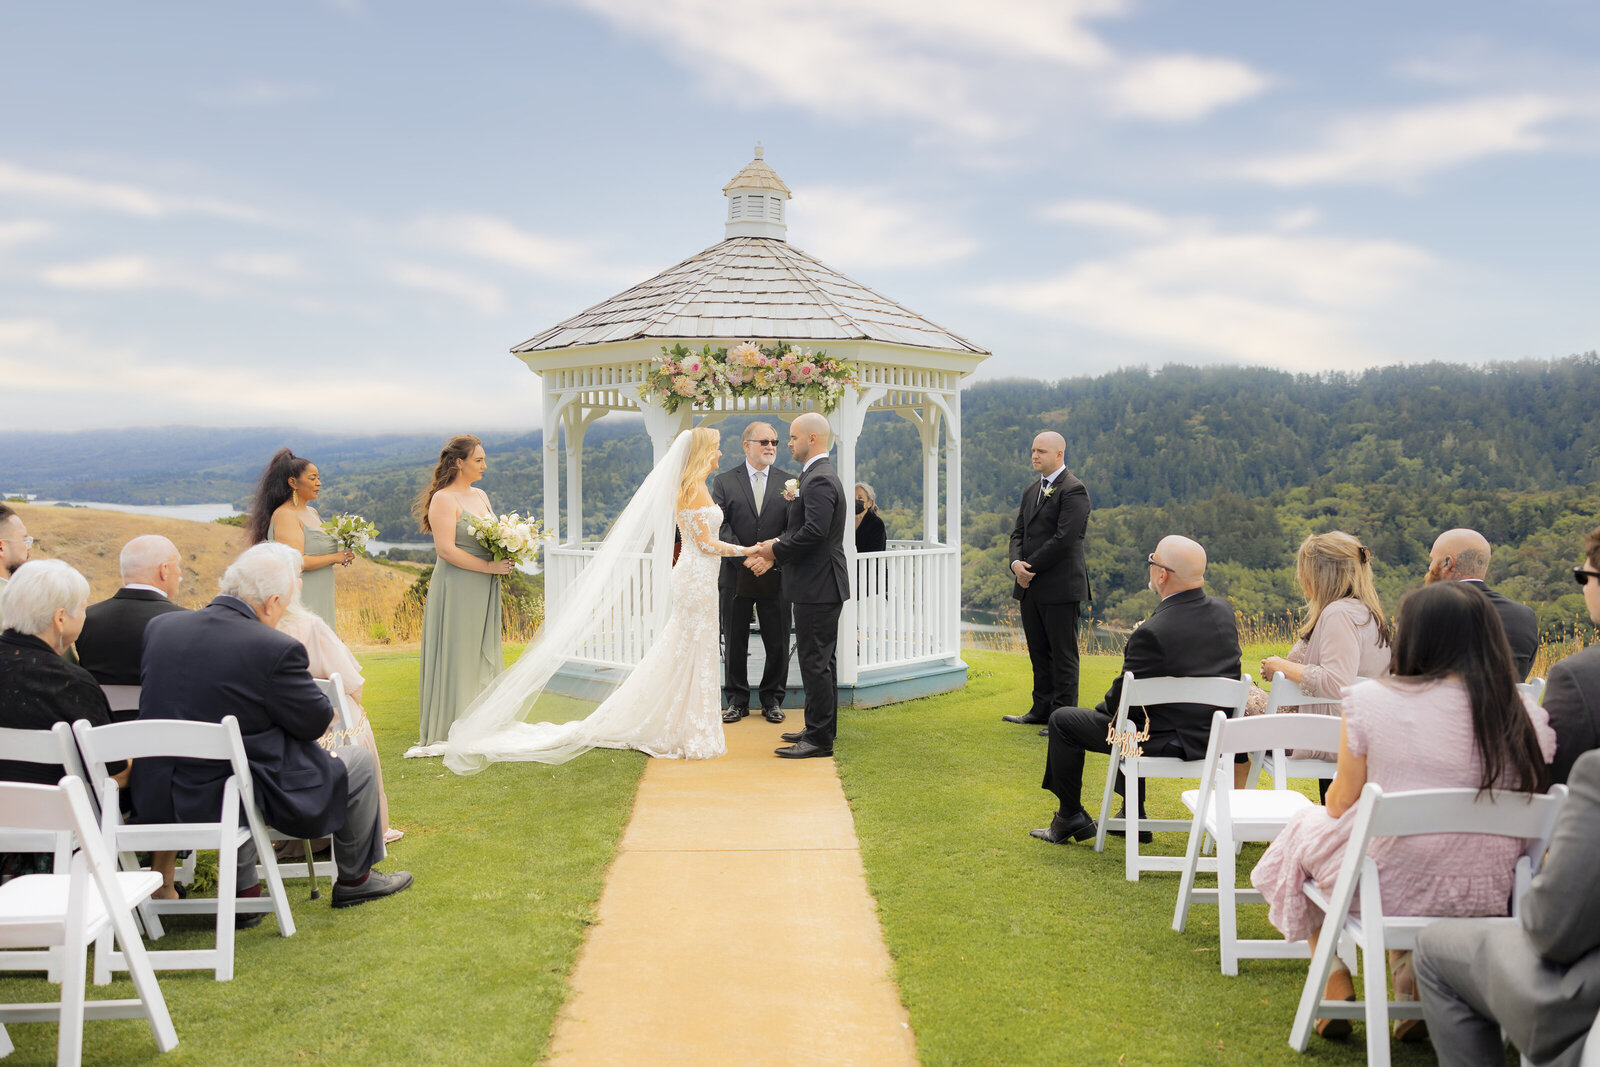 Bride and Groom exchange vows during  a wedding ceremony with guests looking on in front of green mountains and a gazebo. Wedding photographer philippe studio pro from Sacramento captured the moment with his camera.